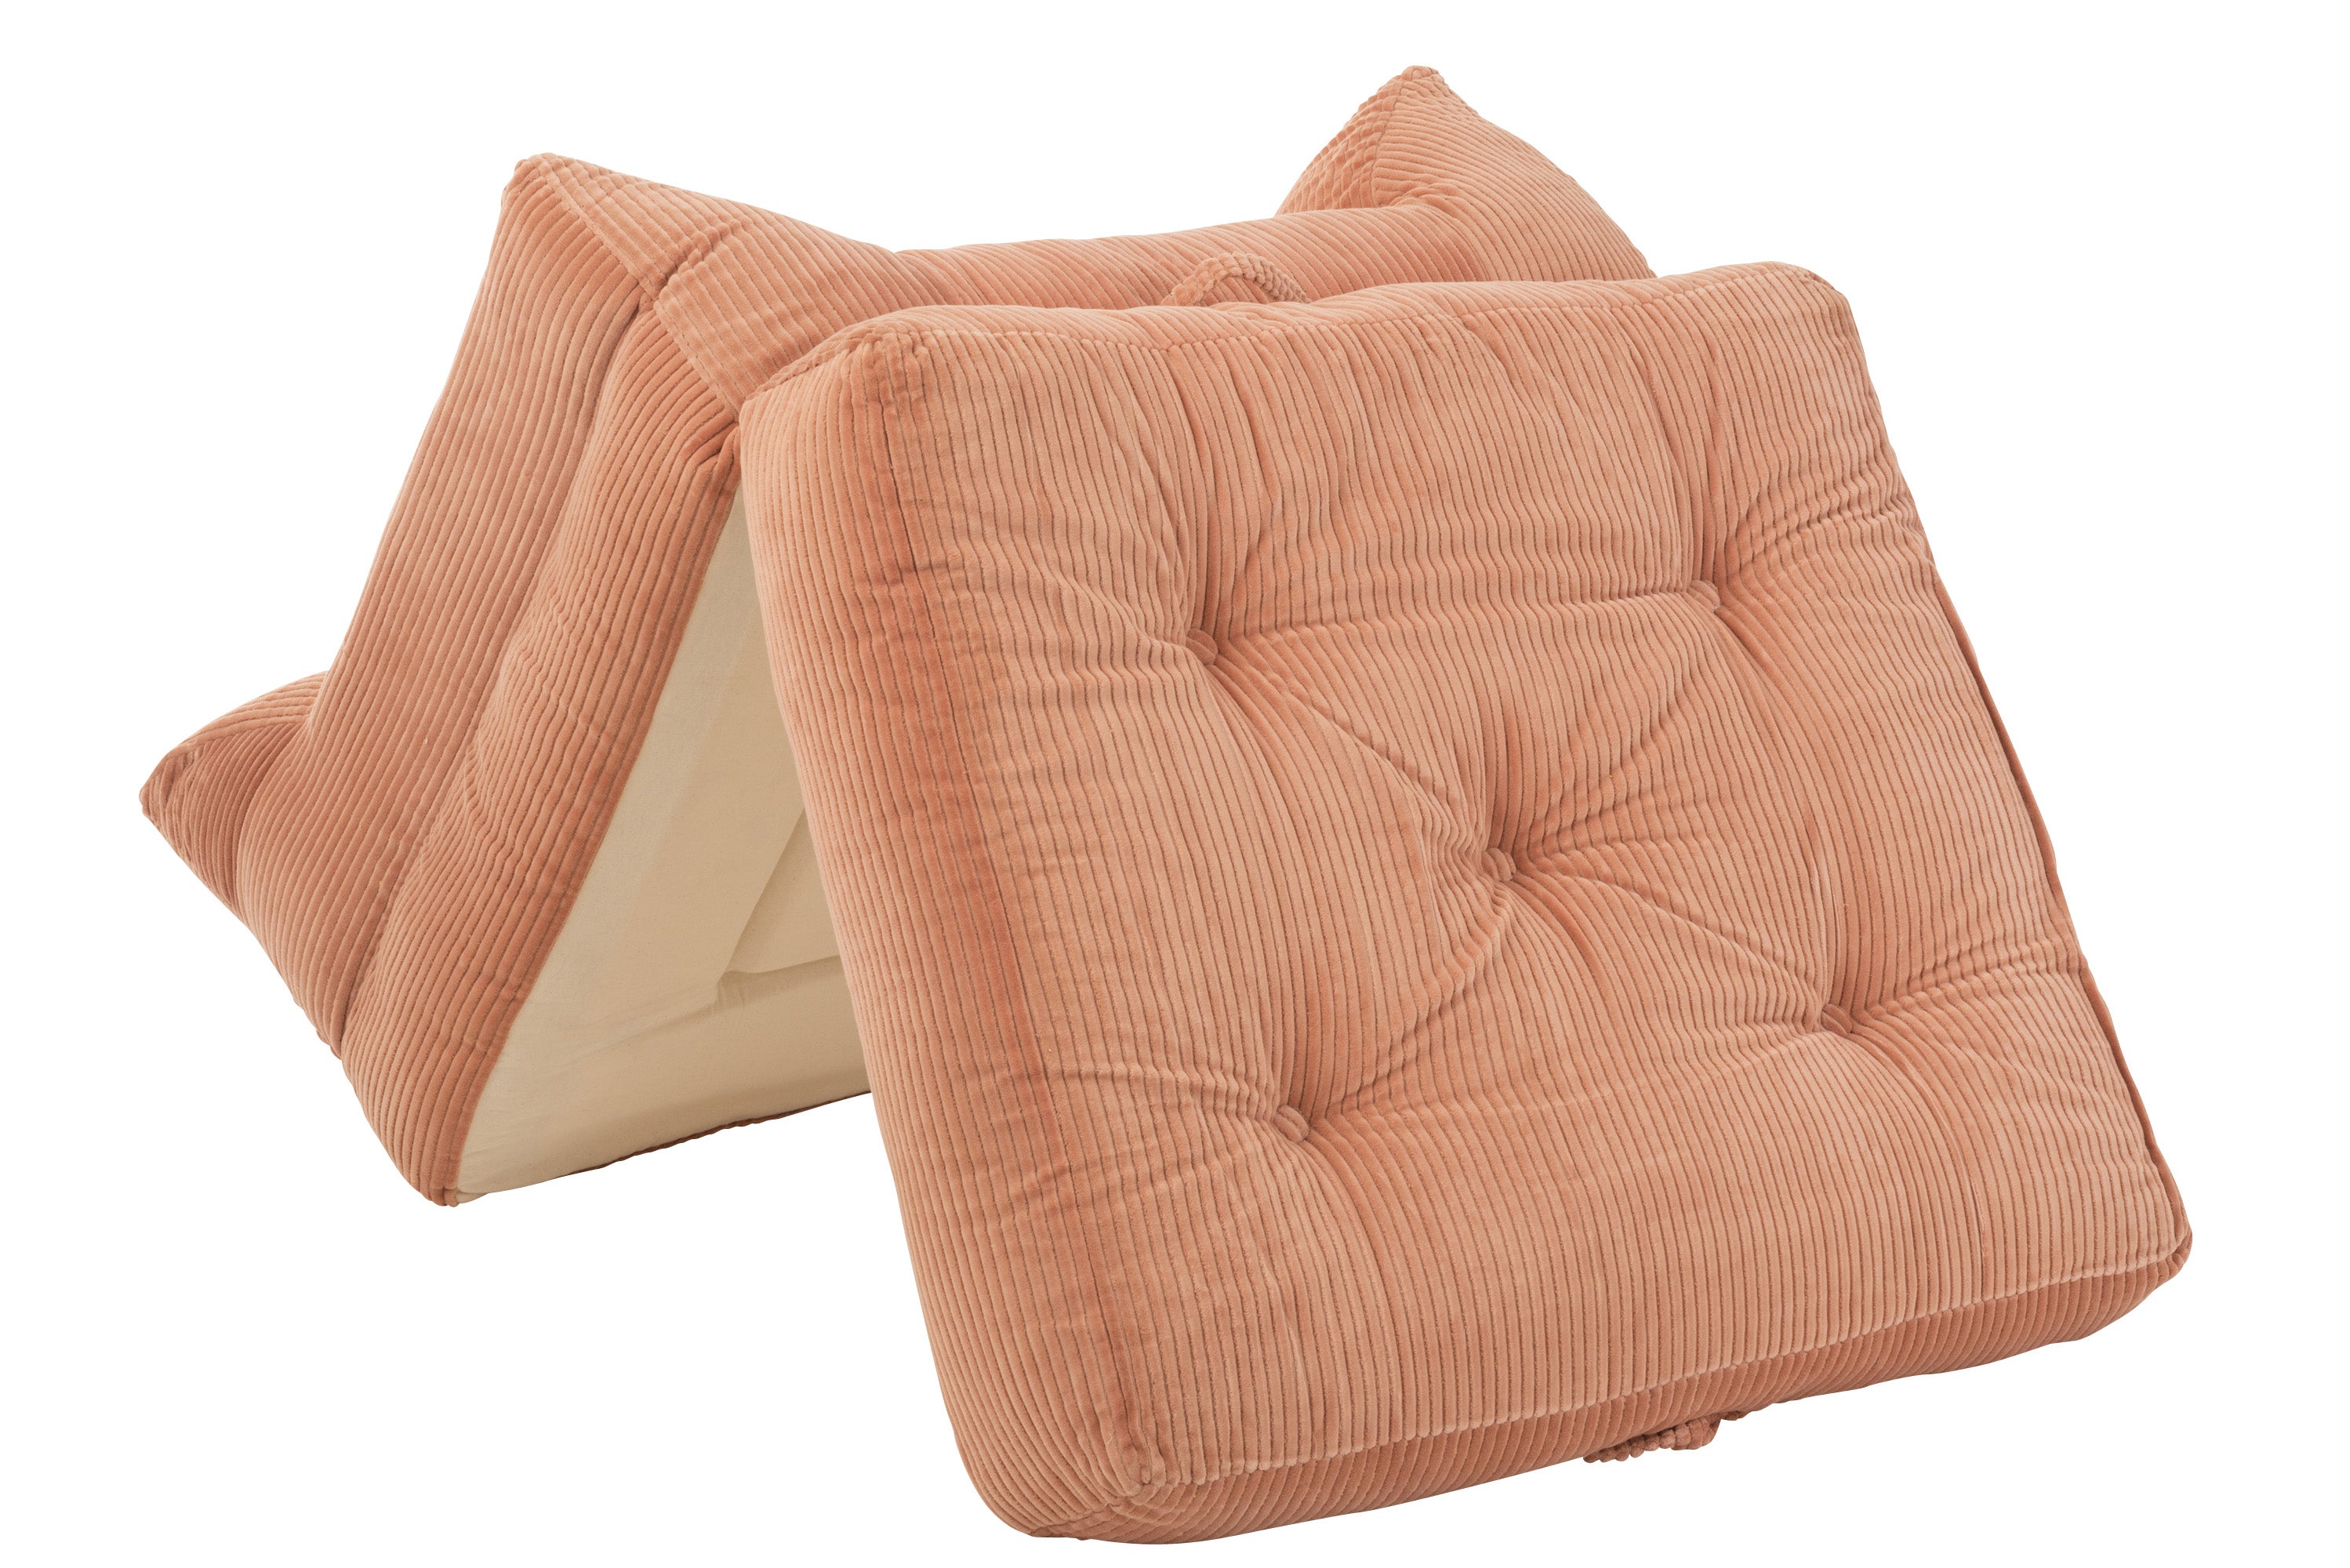 SESSEL 1 PERSON VELOURS BAUMWOLLE ROSA